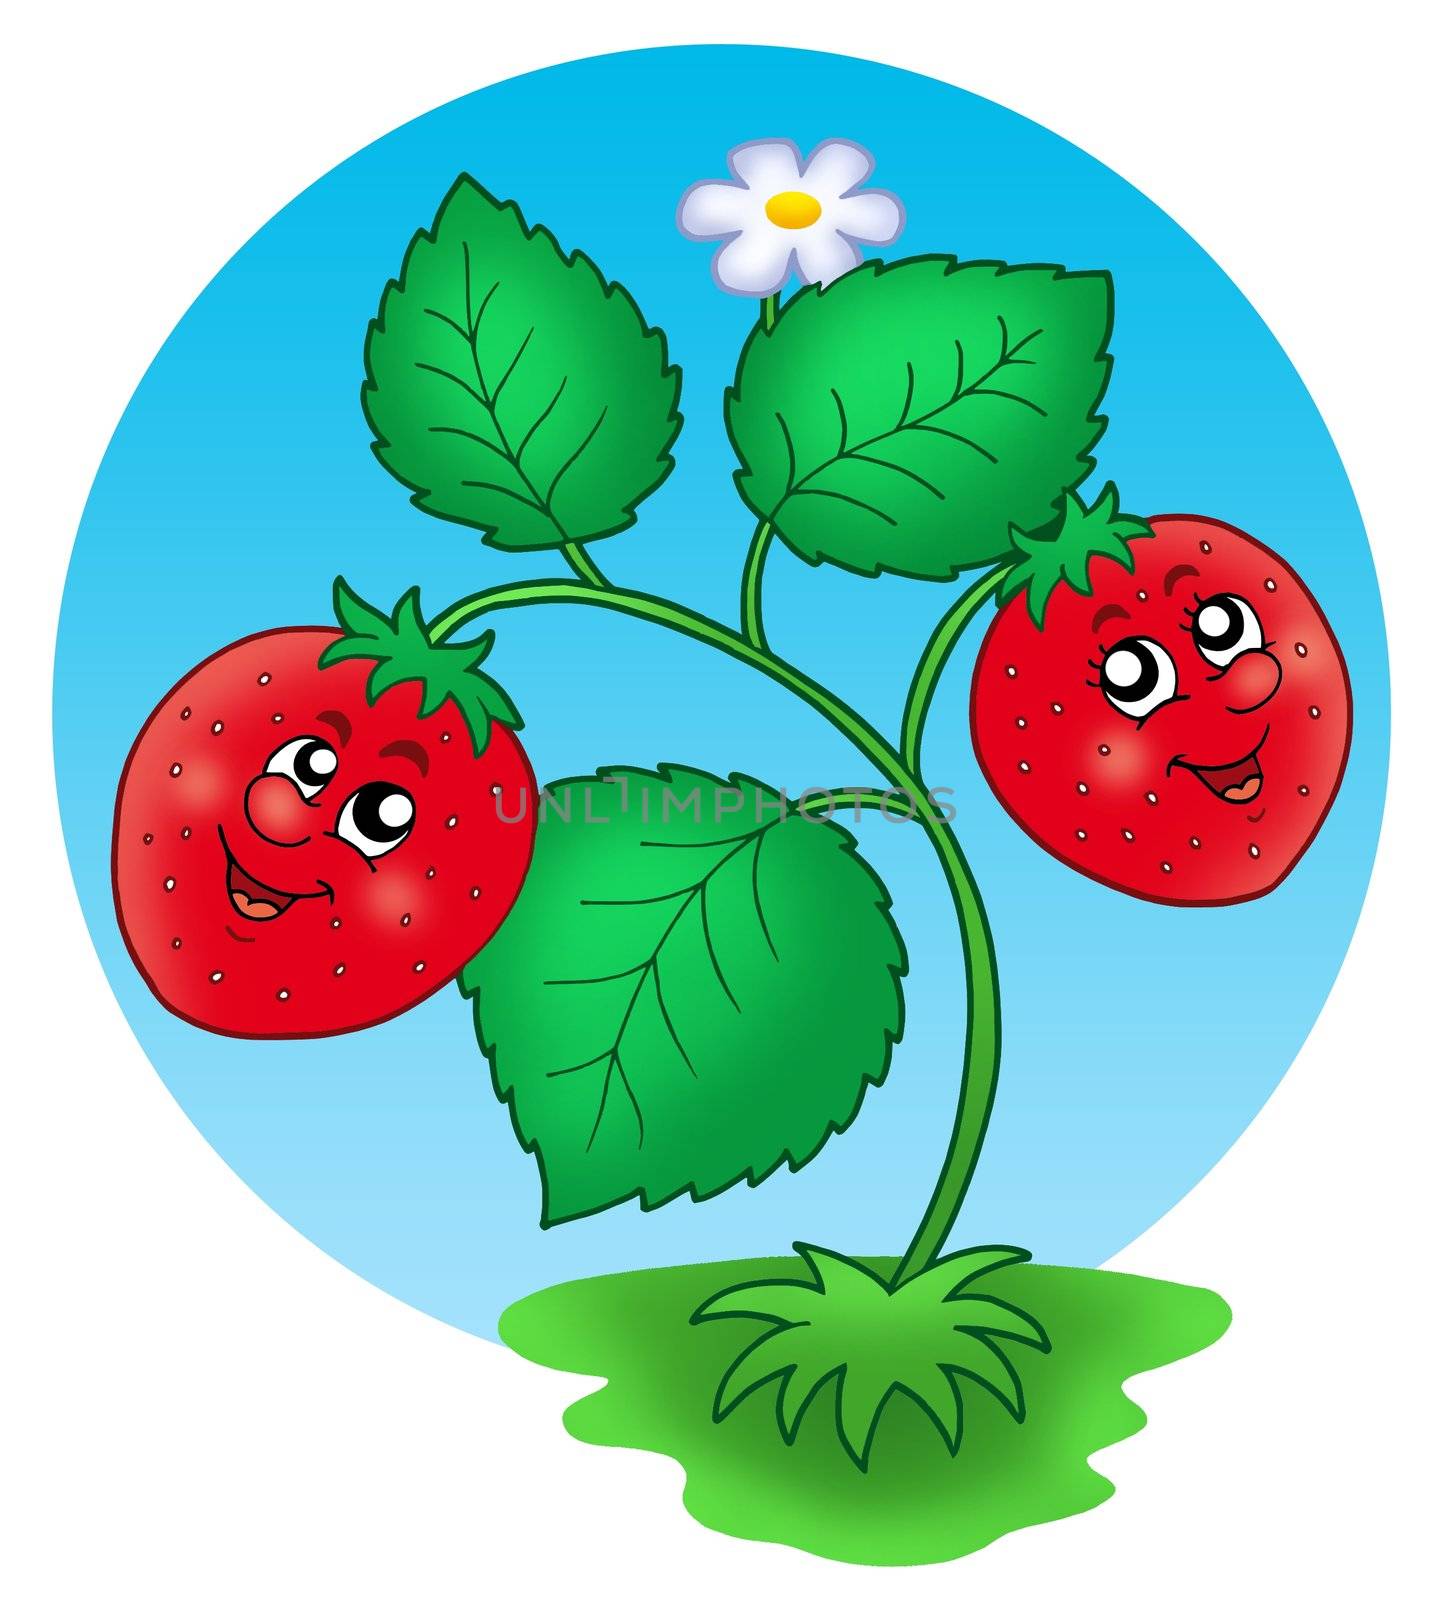 Cute smiling strawberry - color illustration.